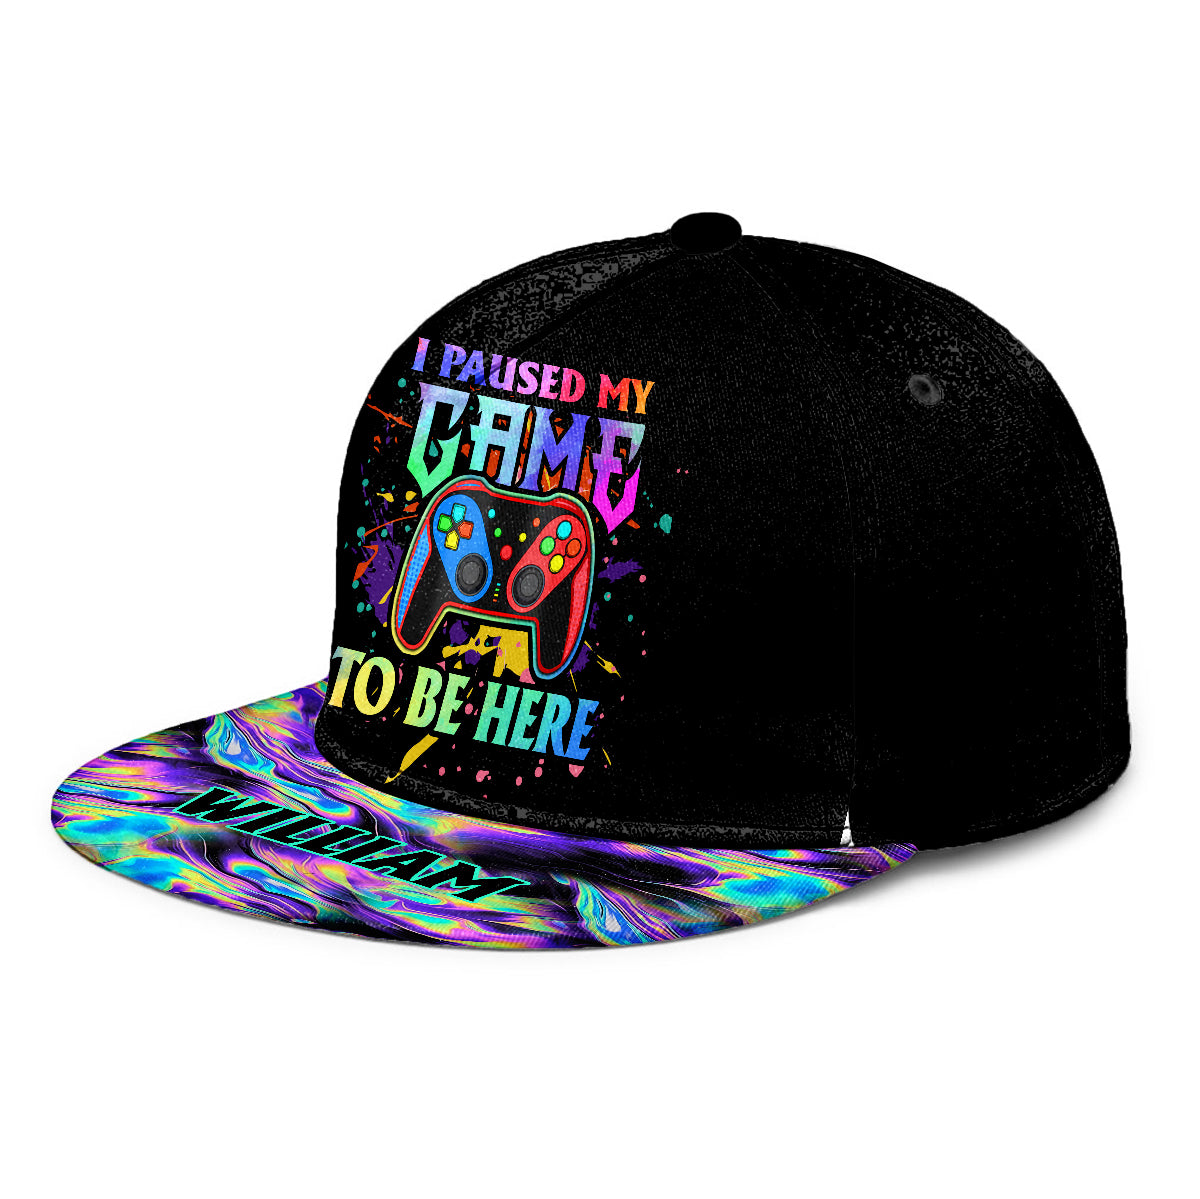 I Paused My Game To Be Here - Personalized Video Game Snapback